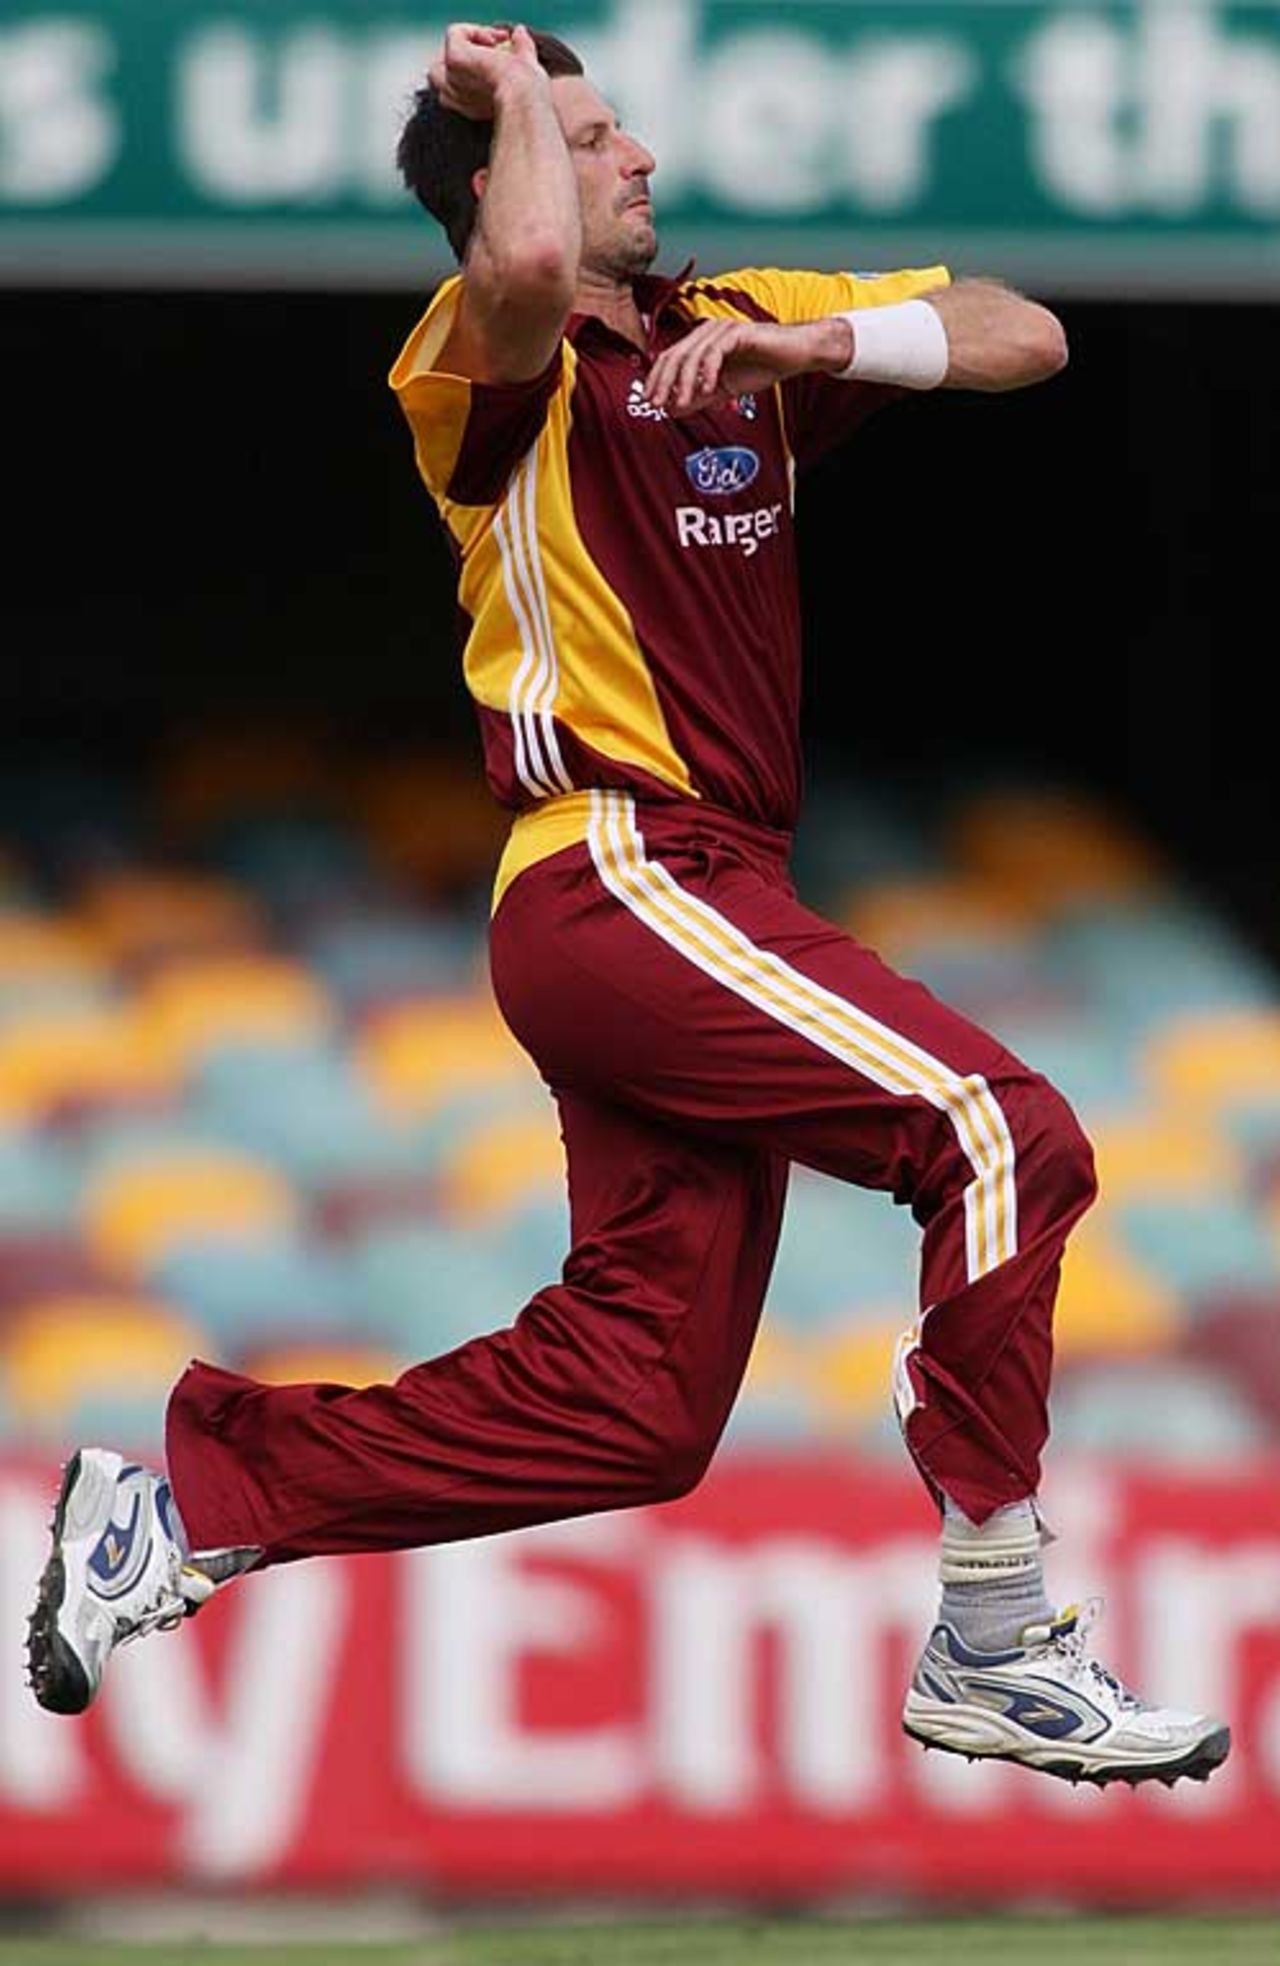 Michael Kasprowicz during his final spell for Queensland before retirement, Queensland v Western Australia, FR Cup, Brisbane, February 16, 2008